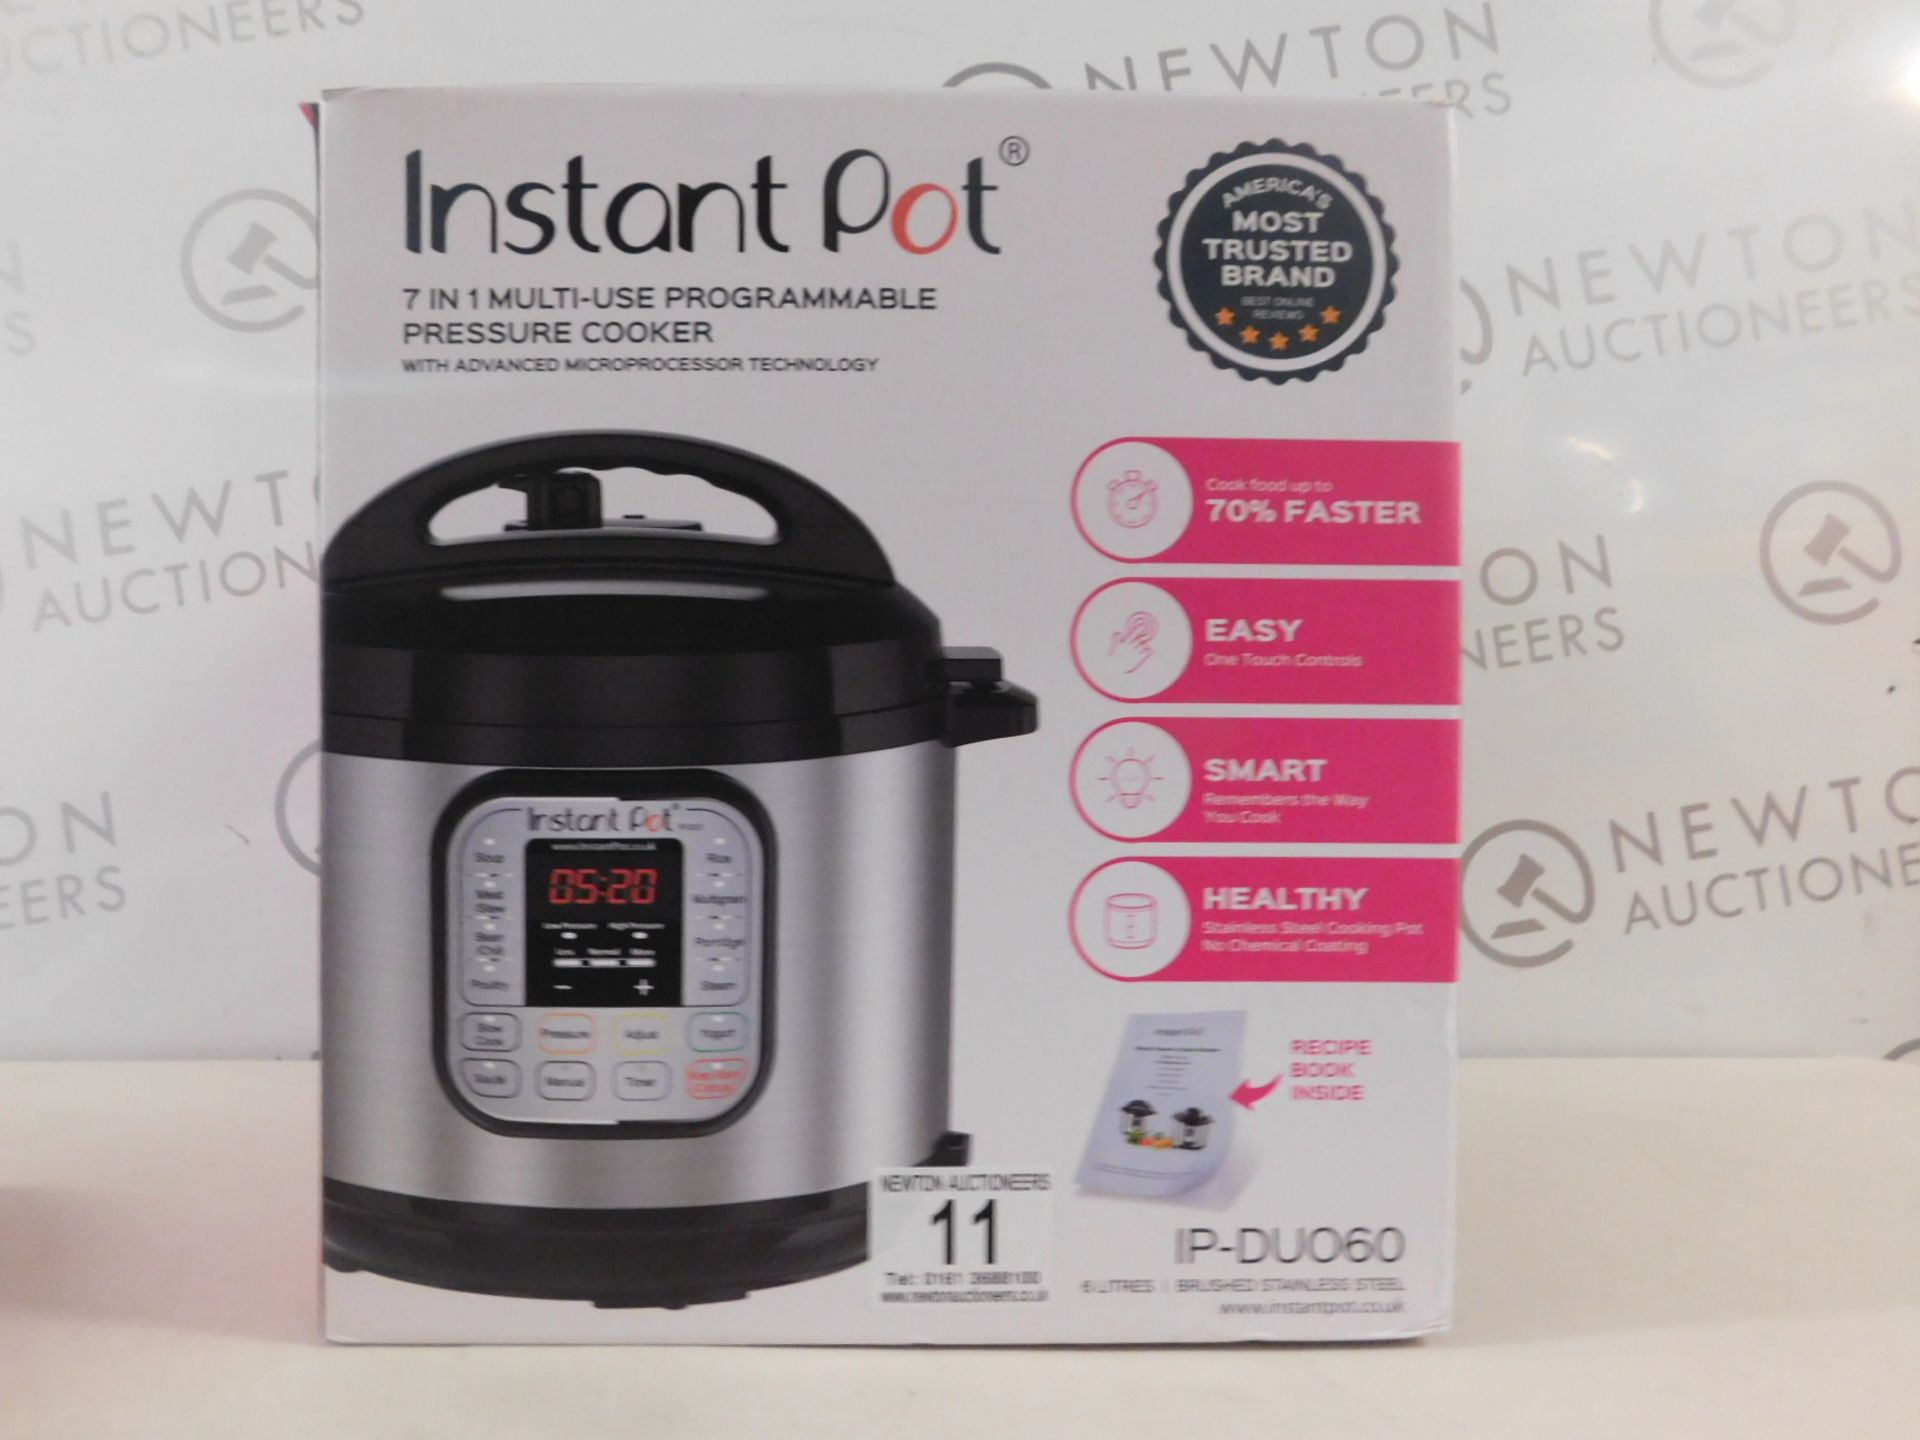 1 BOXED INSTANT POT IP-DUO60 7 IN 1 MULT-FUNCTIONAL COOKER RRP £159.99